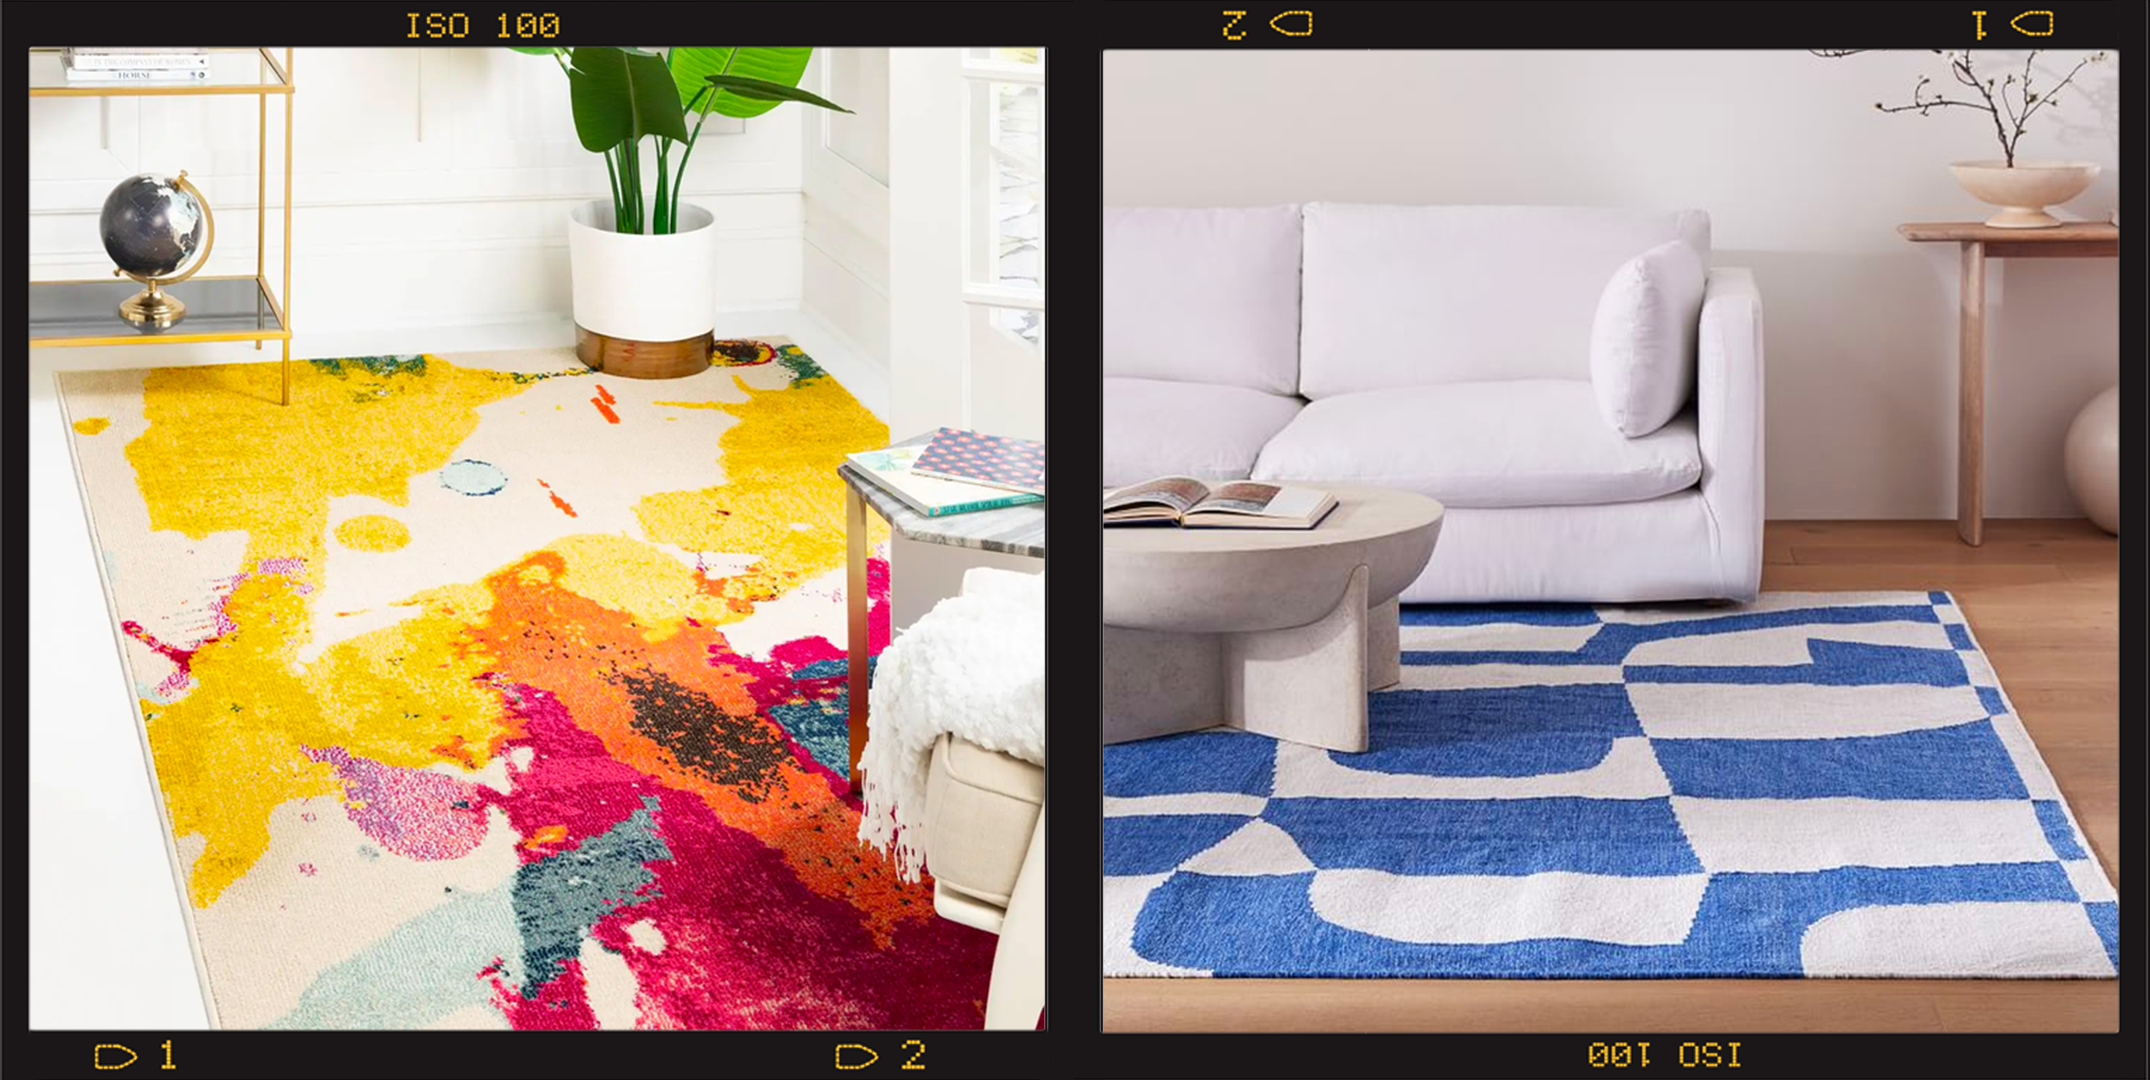 Rug ideas for a small living room that you must try - Faber Rug Co